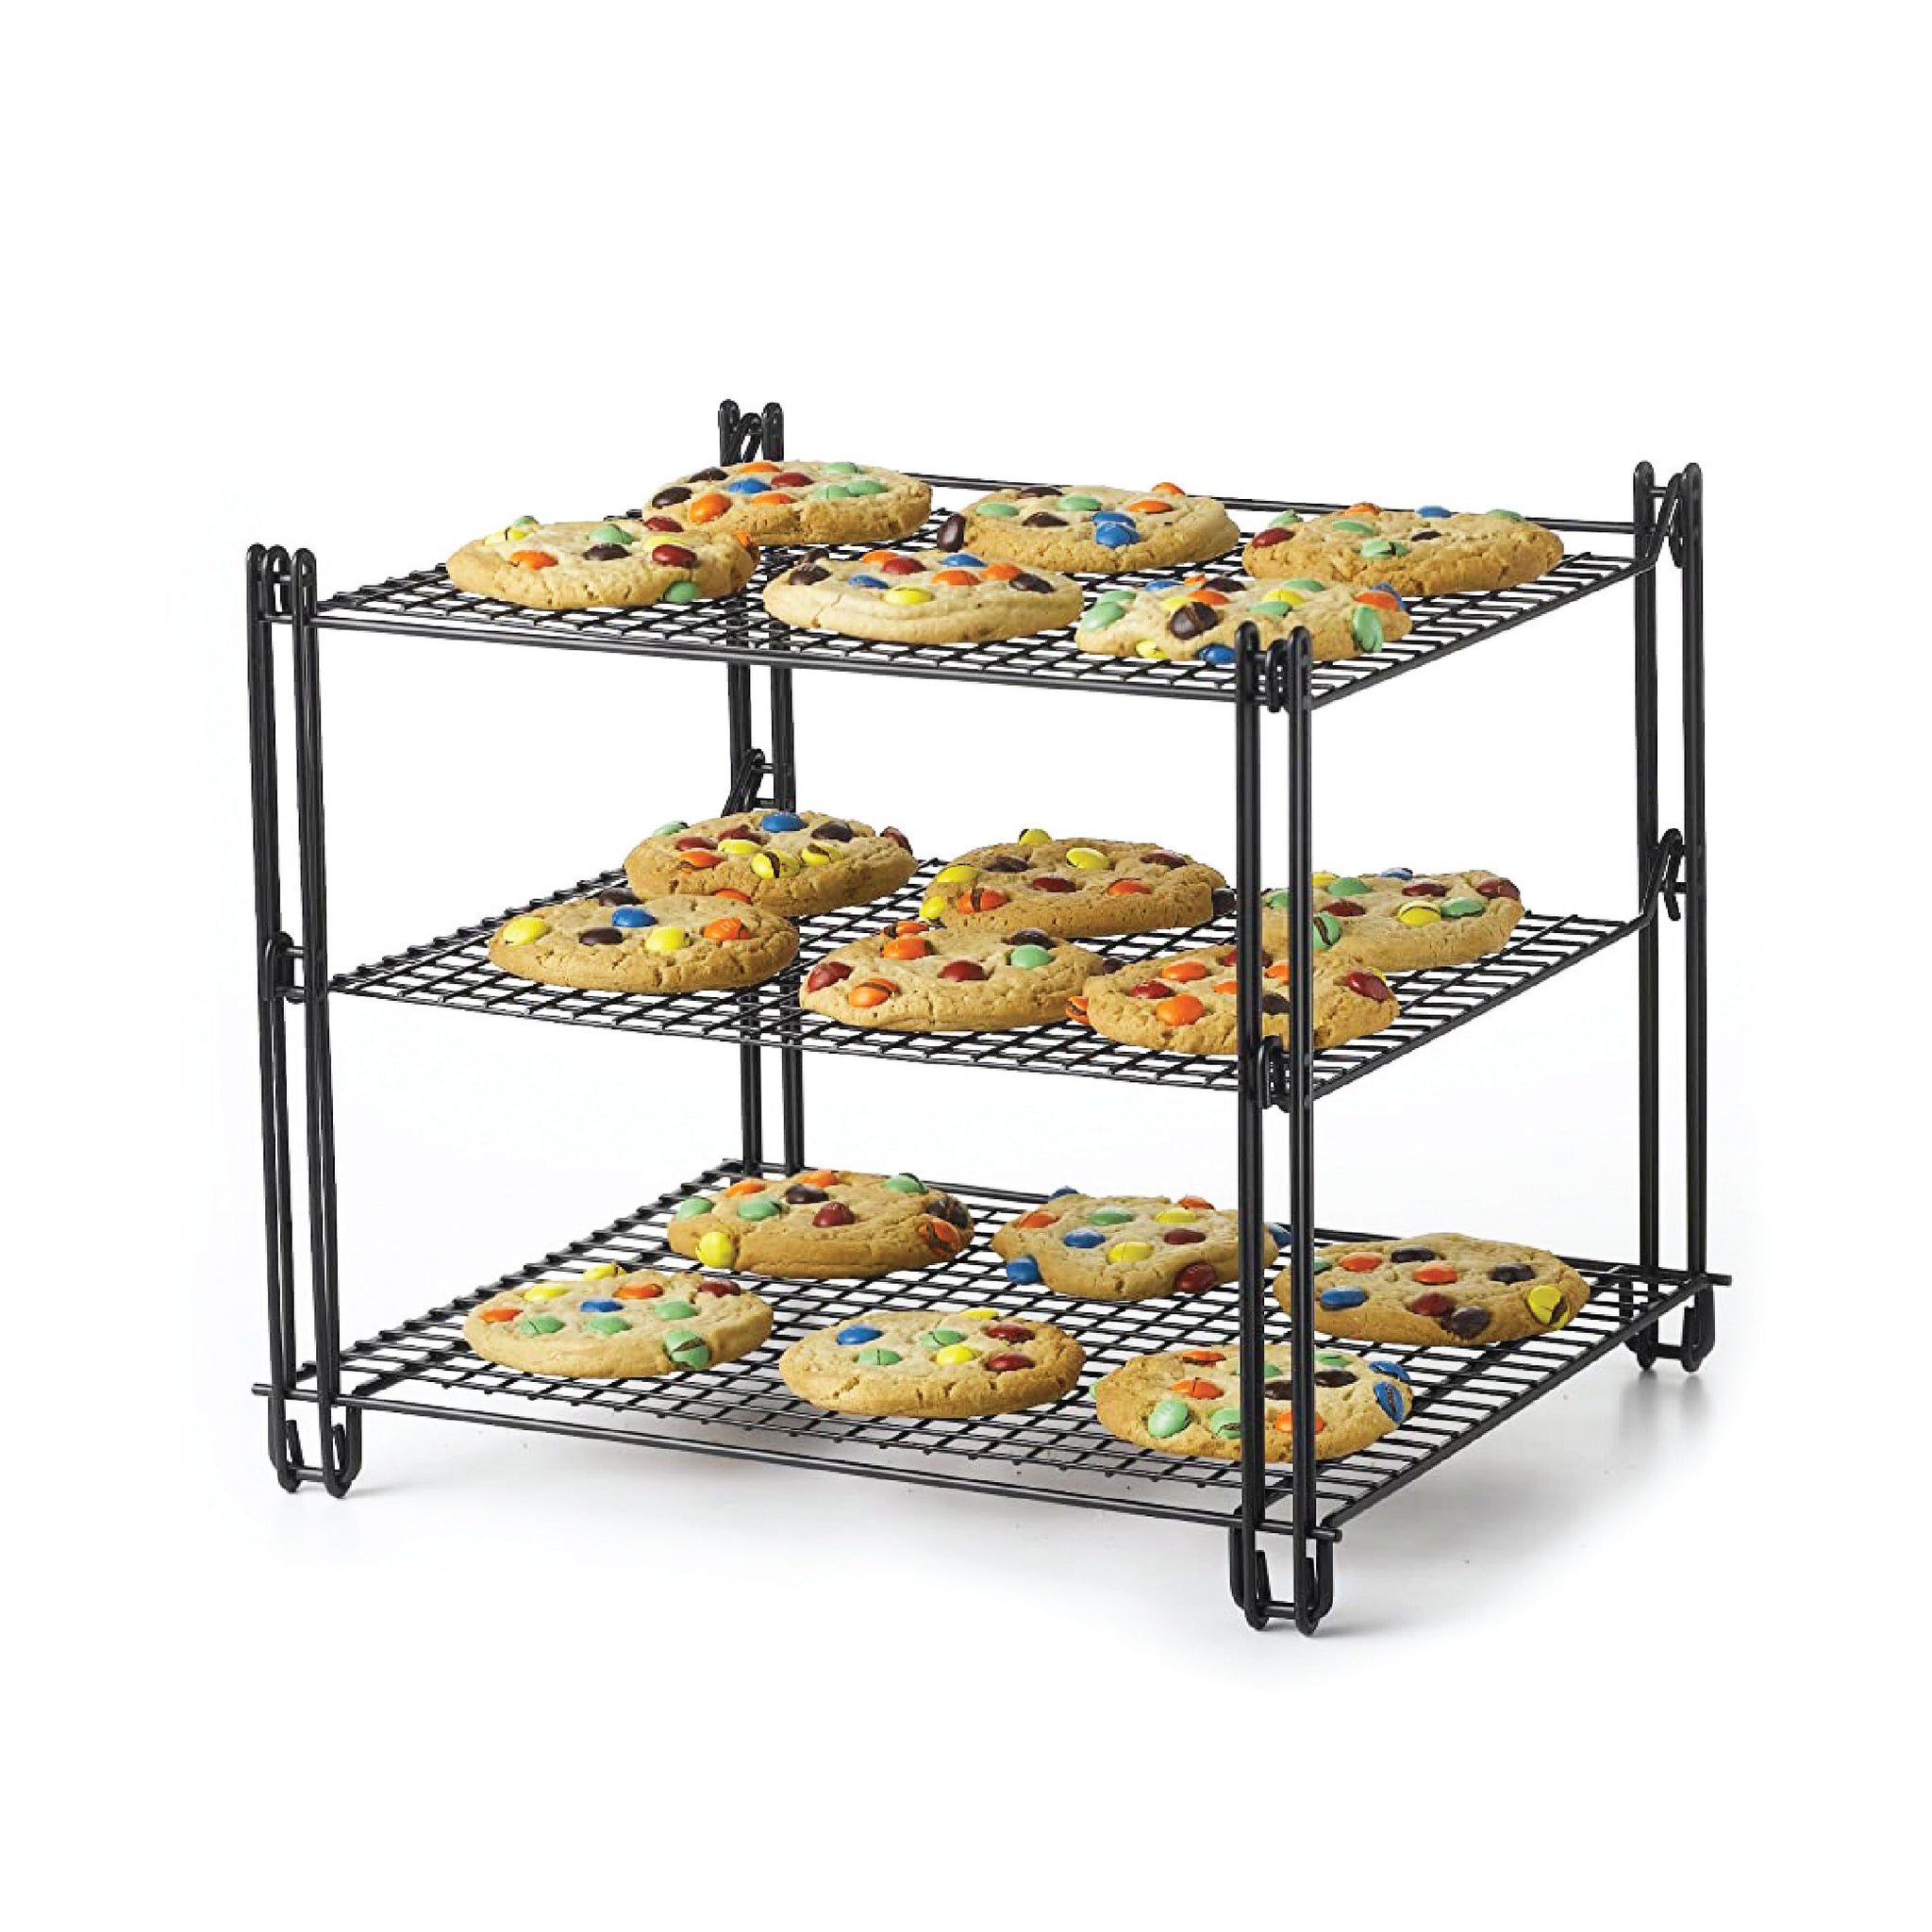 Nifty Home 3 in 1 Oven Rack 